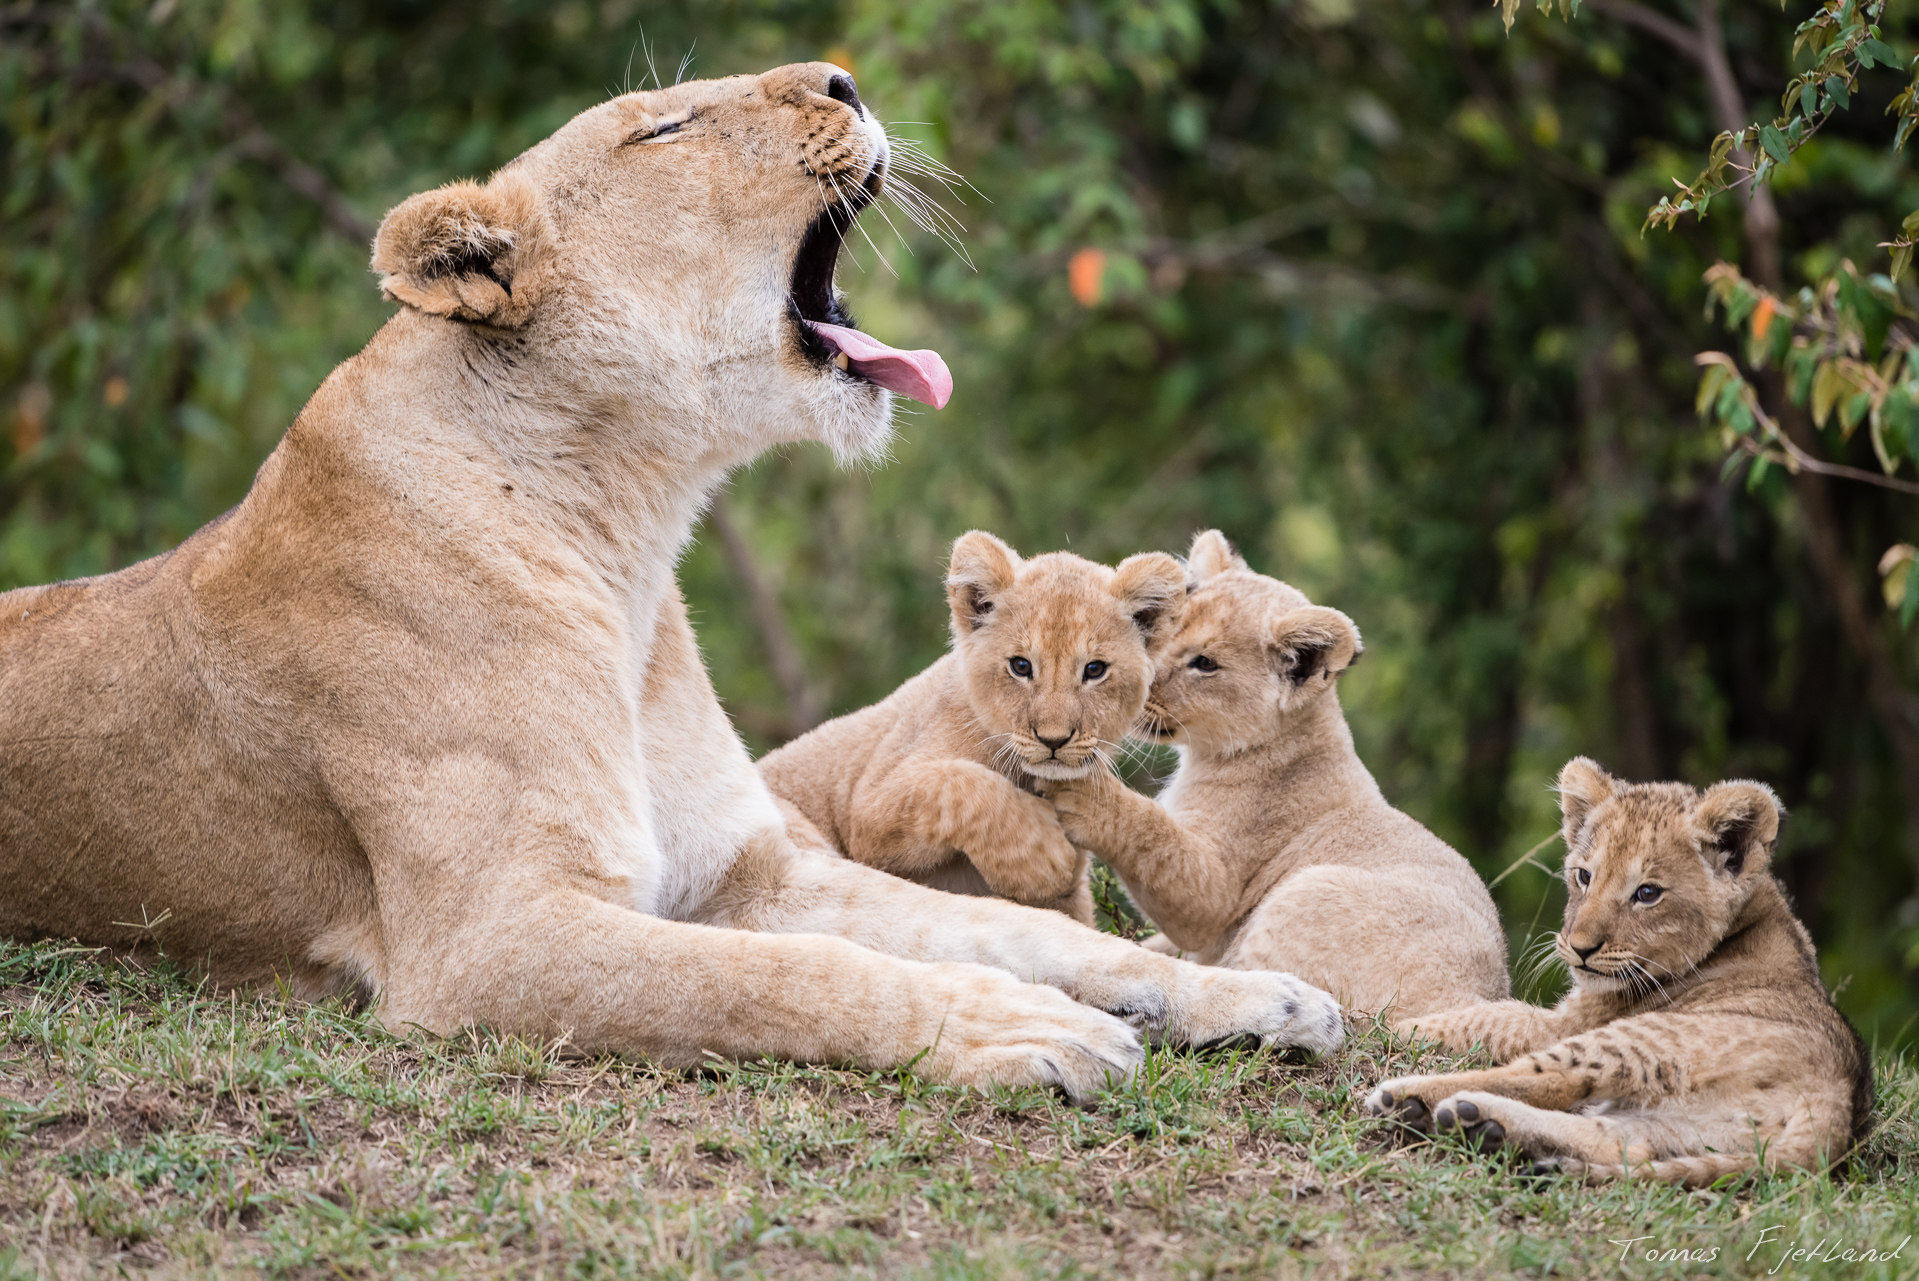 A short break in the play between cubs.